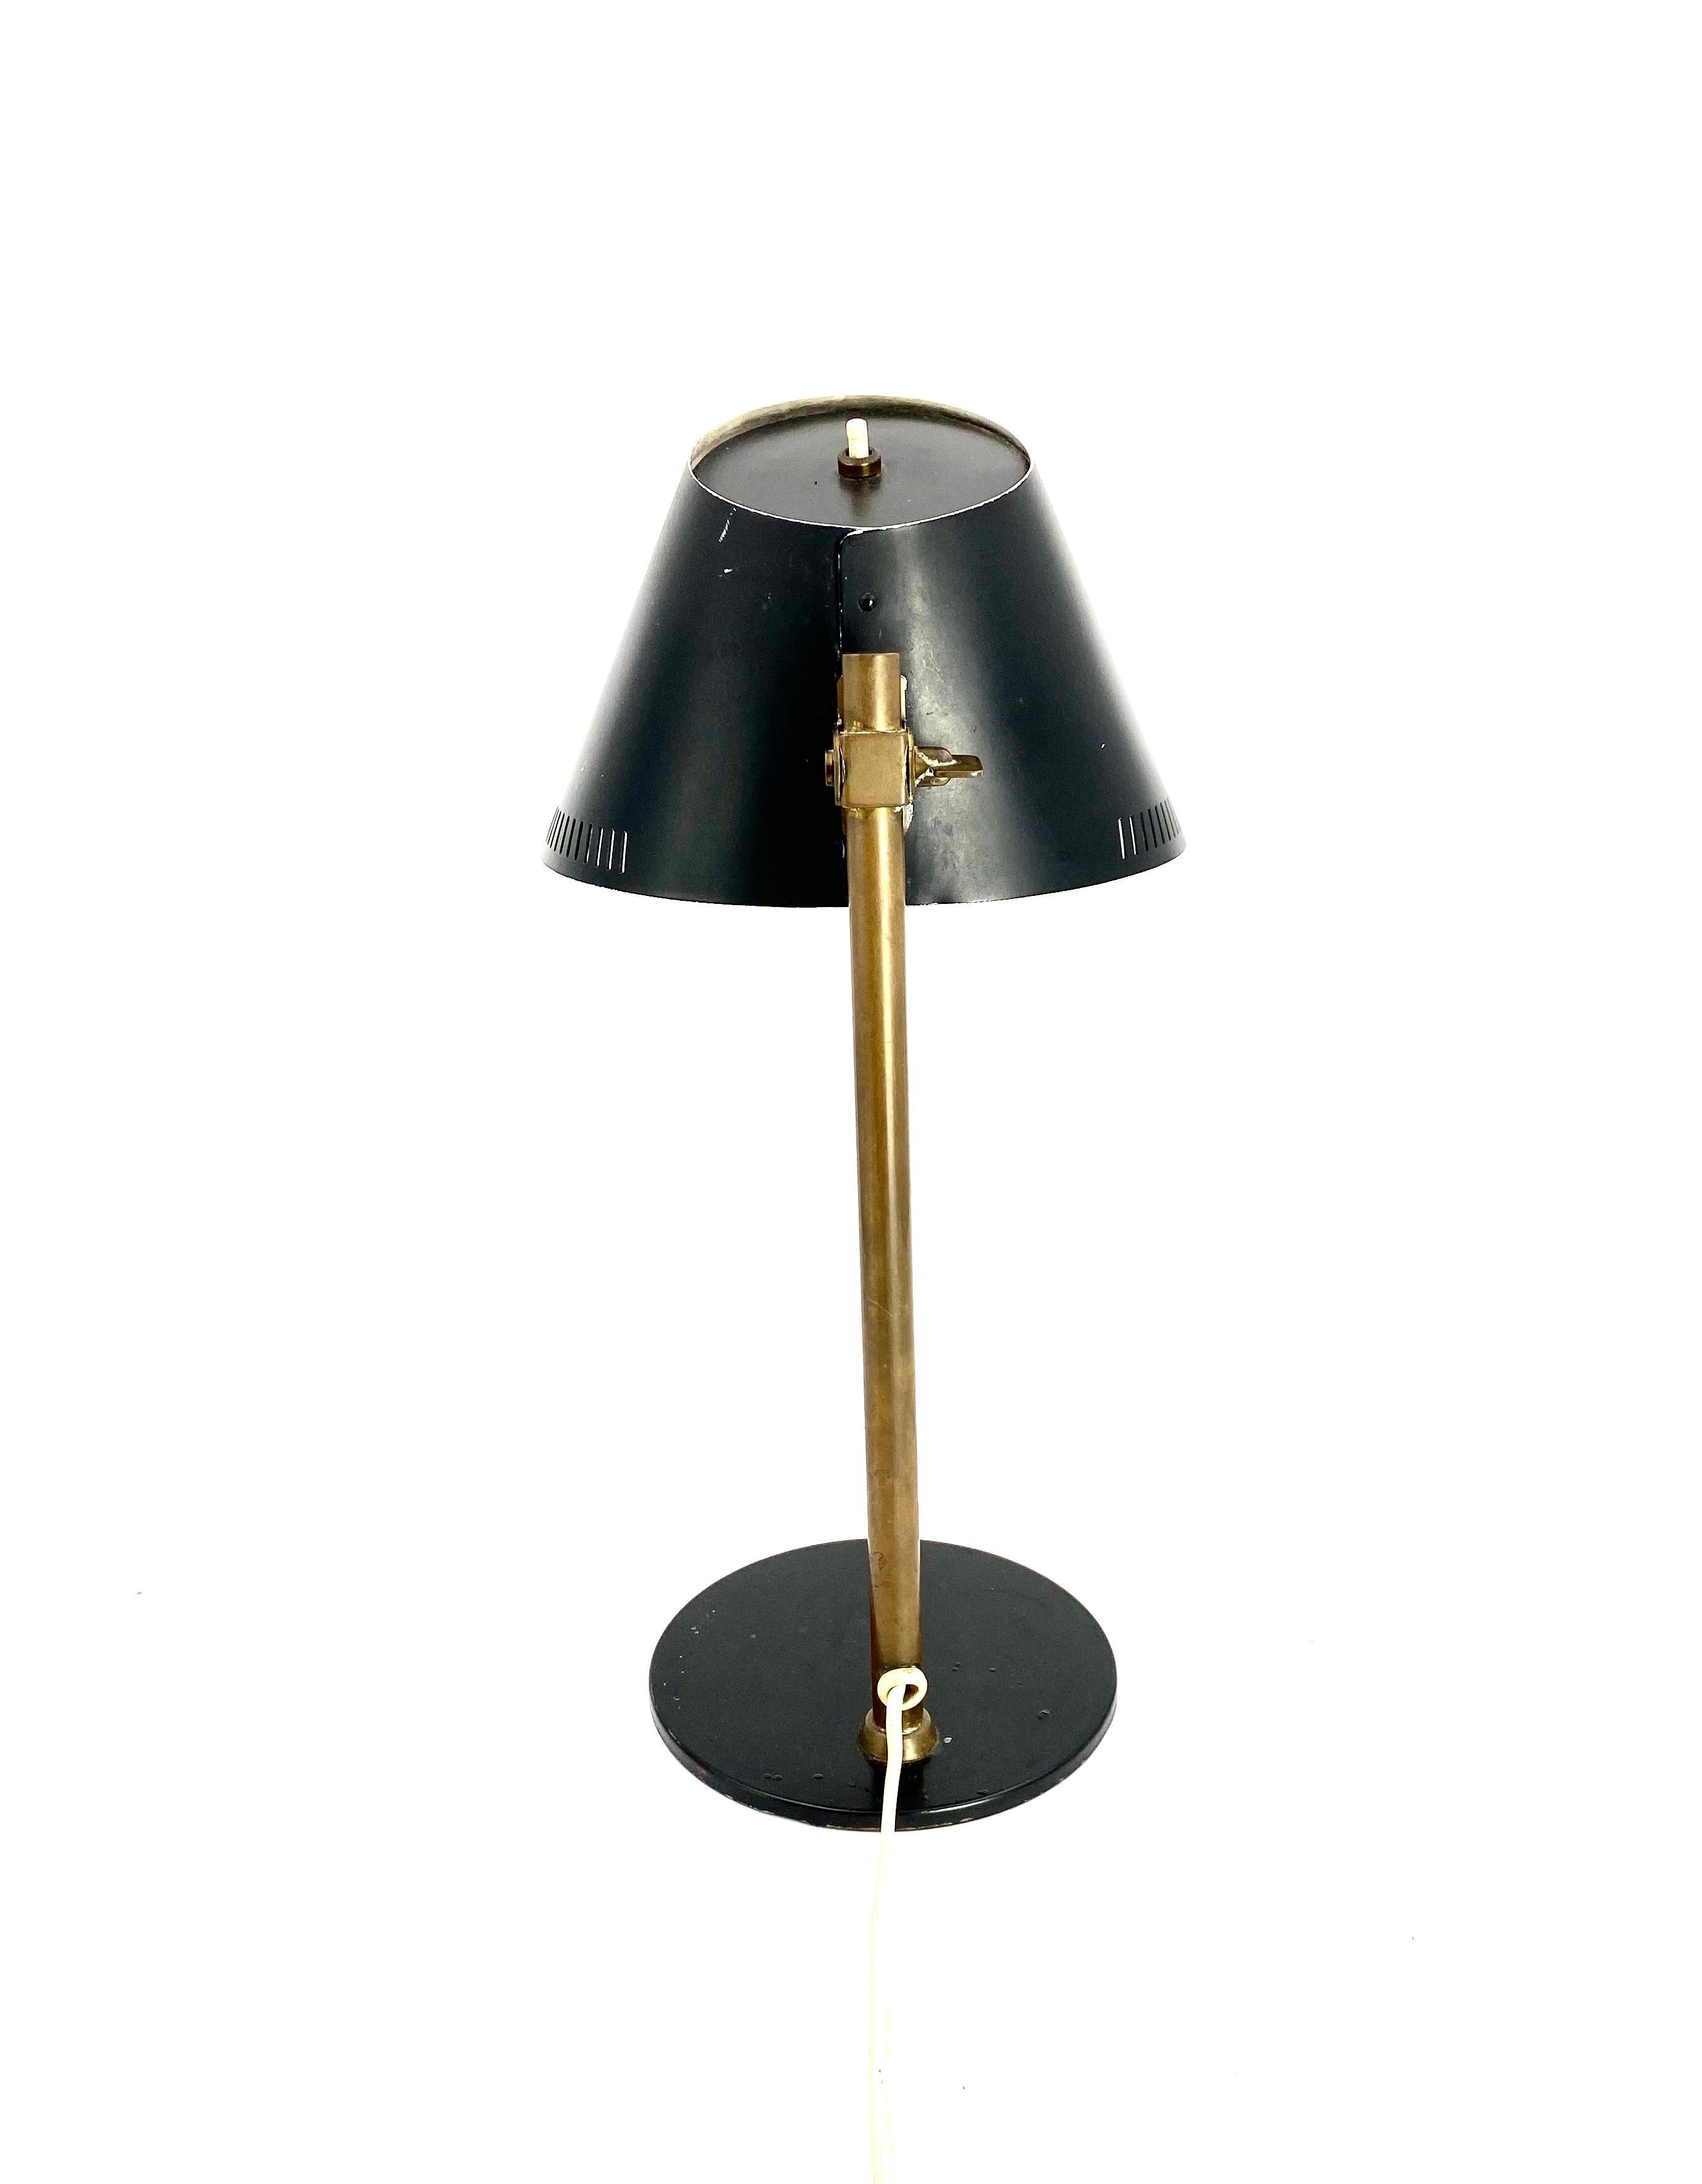 Paavo Tynell Rare Table Lamp Mod. 9227, by Taito E Idman, Finland, 1958 For Sale 4